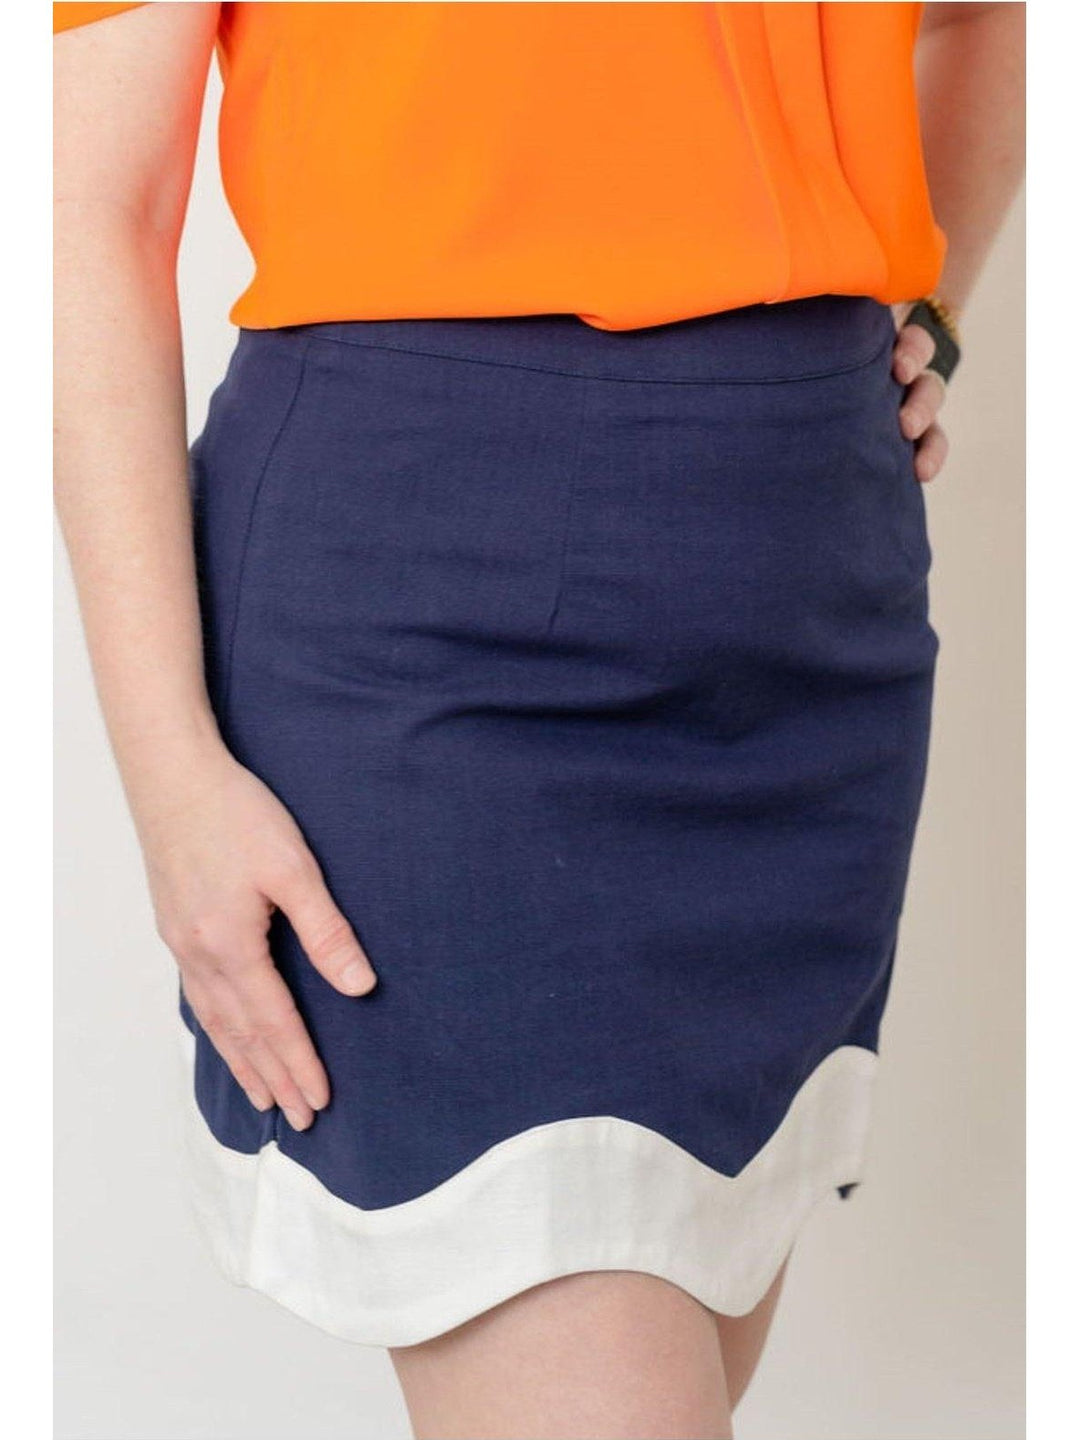 Navy Skirt with White Wave Detail at Bottom - Lolo Viv Boutique